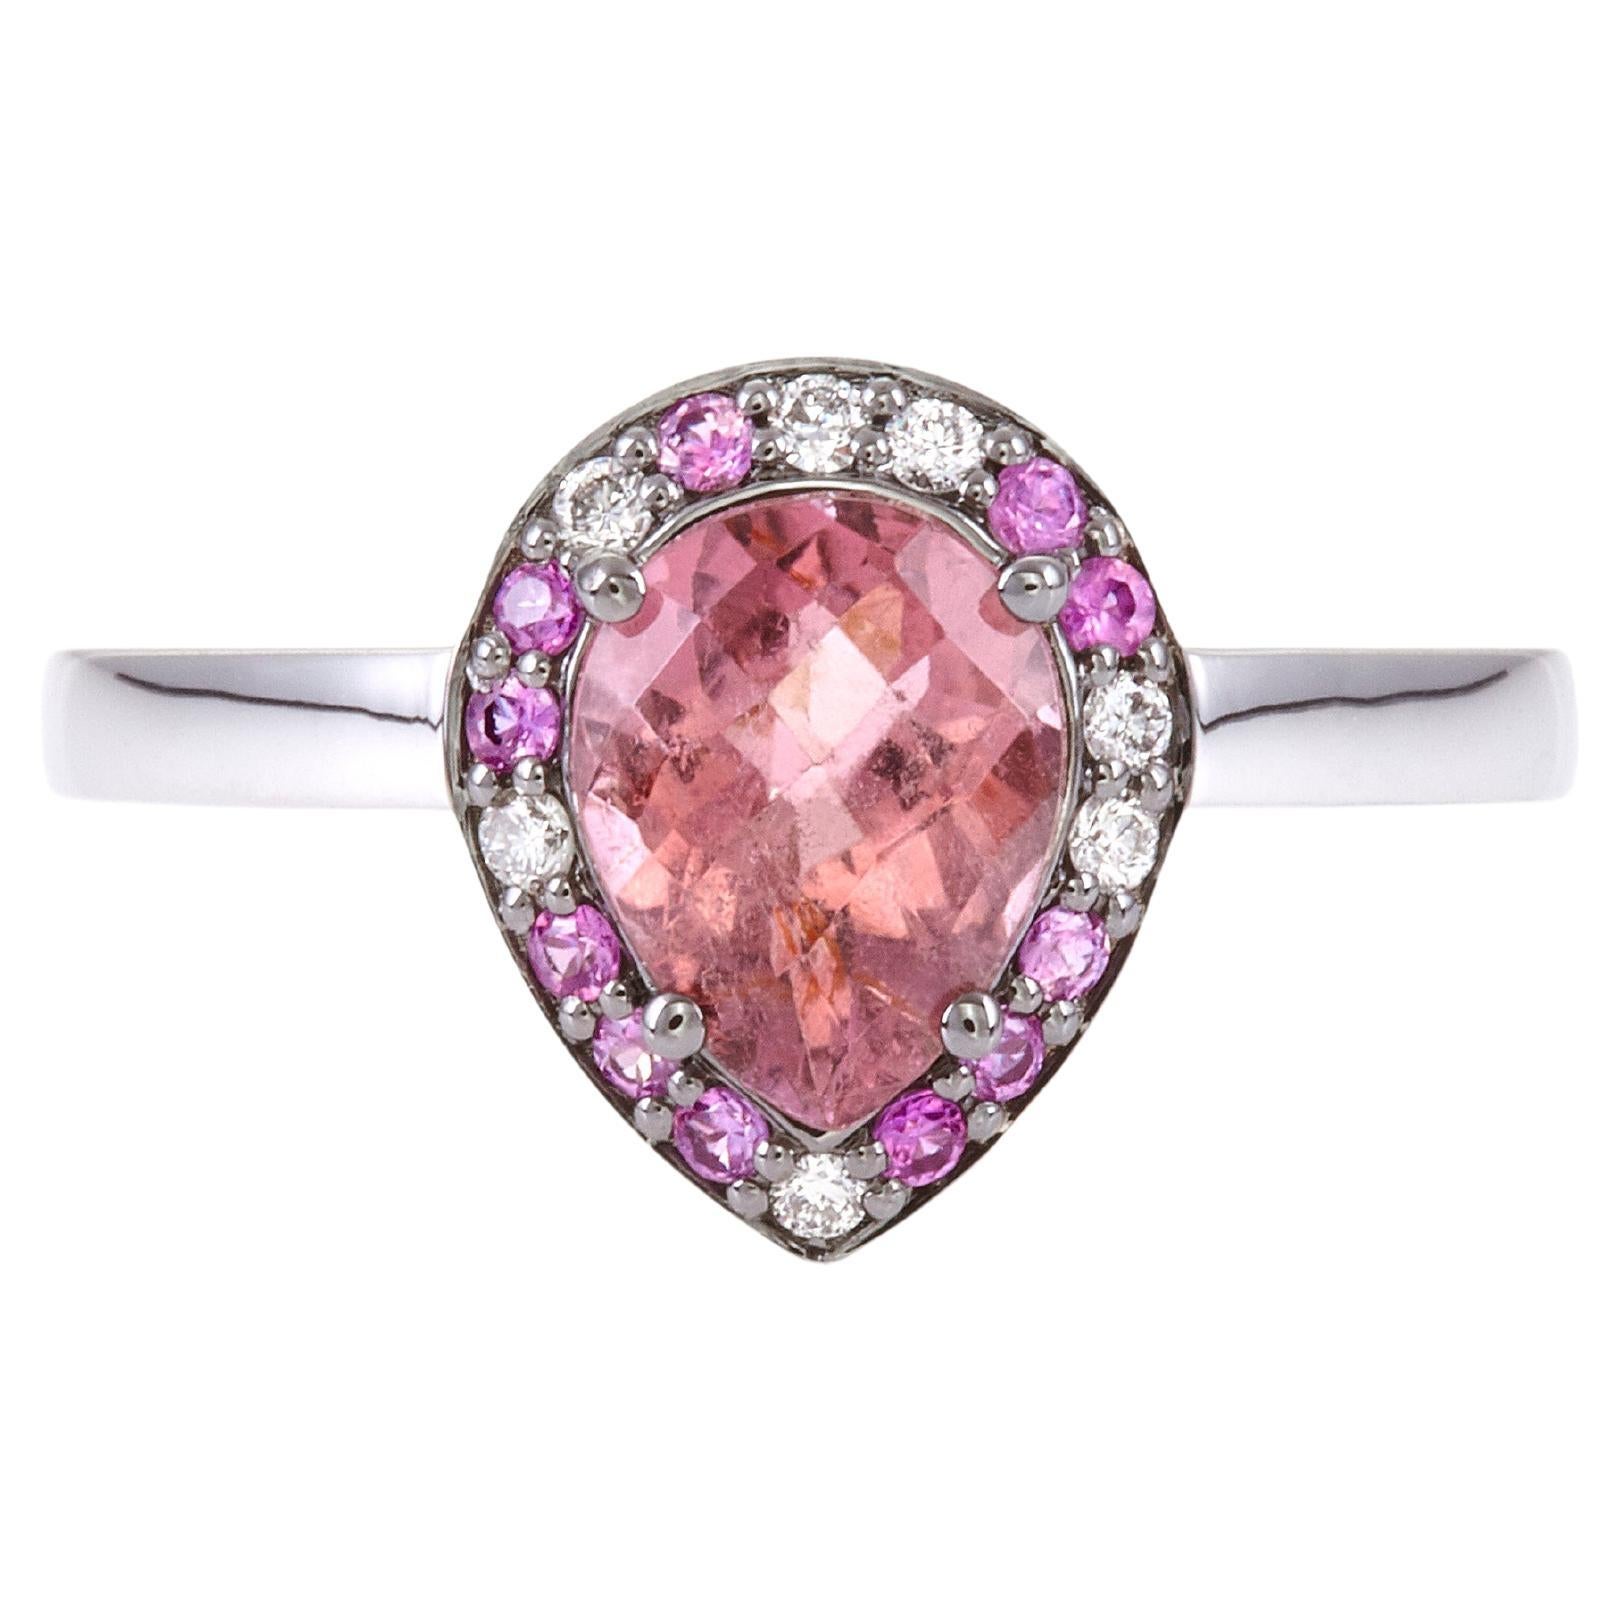 For Sale:  Colorful Drop Ring 18Kt White Gold with Red Tourmaline Pink Saphires and Diamond